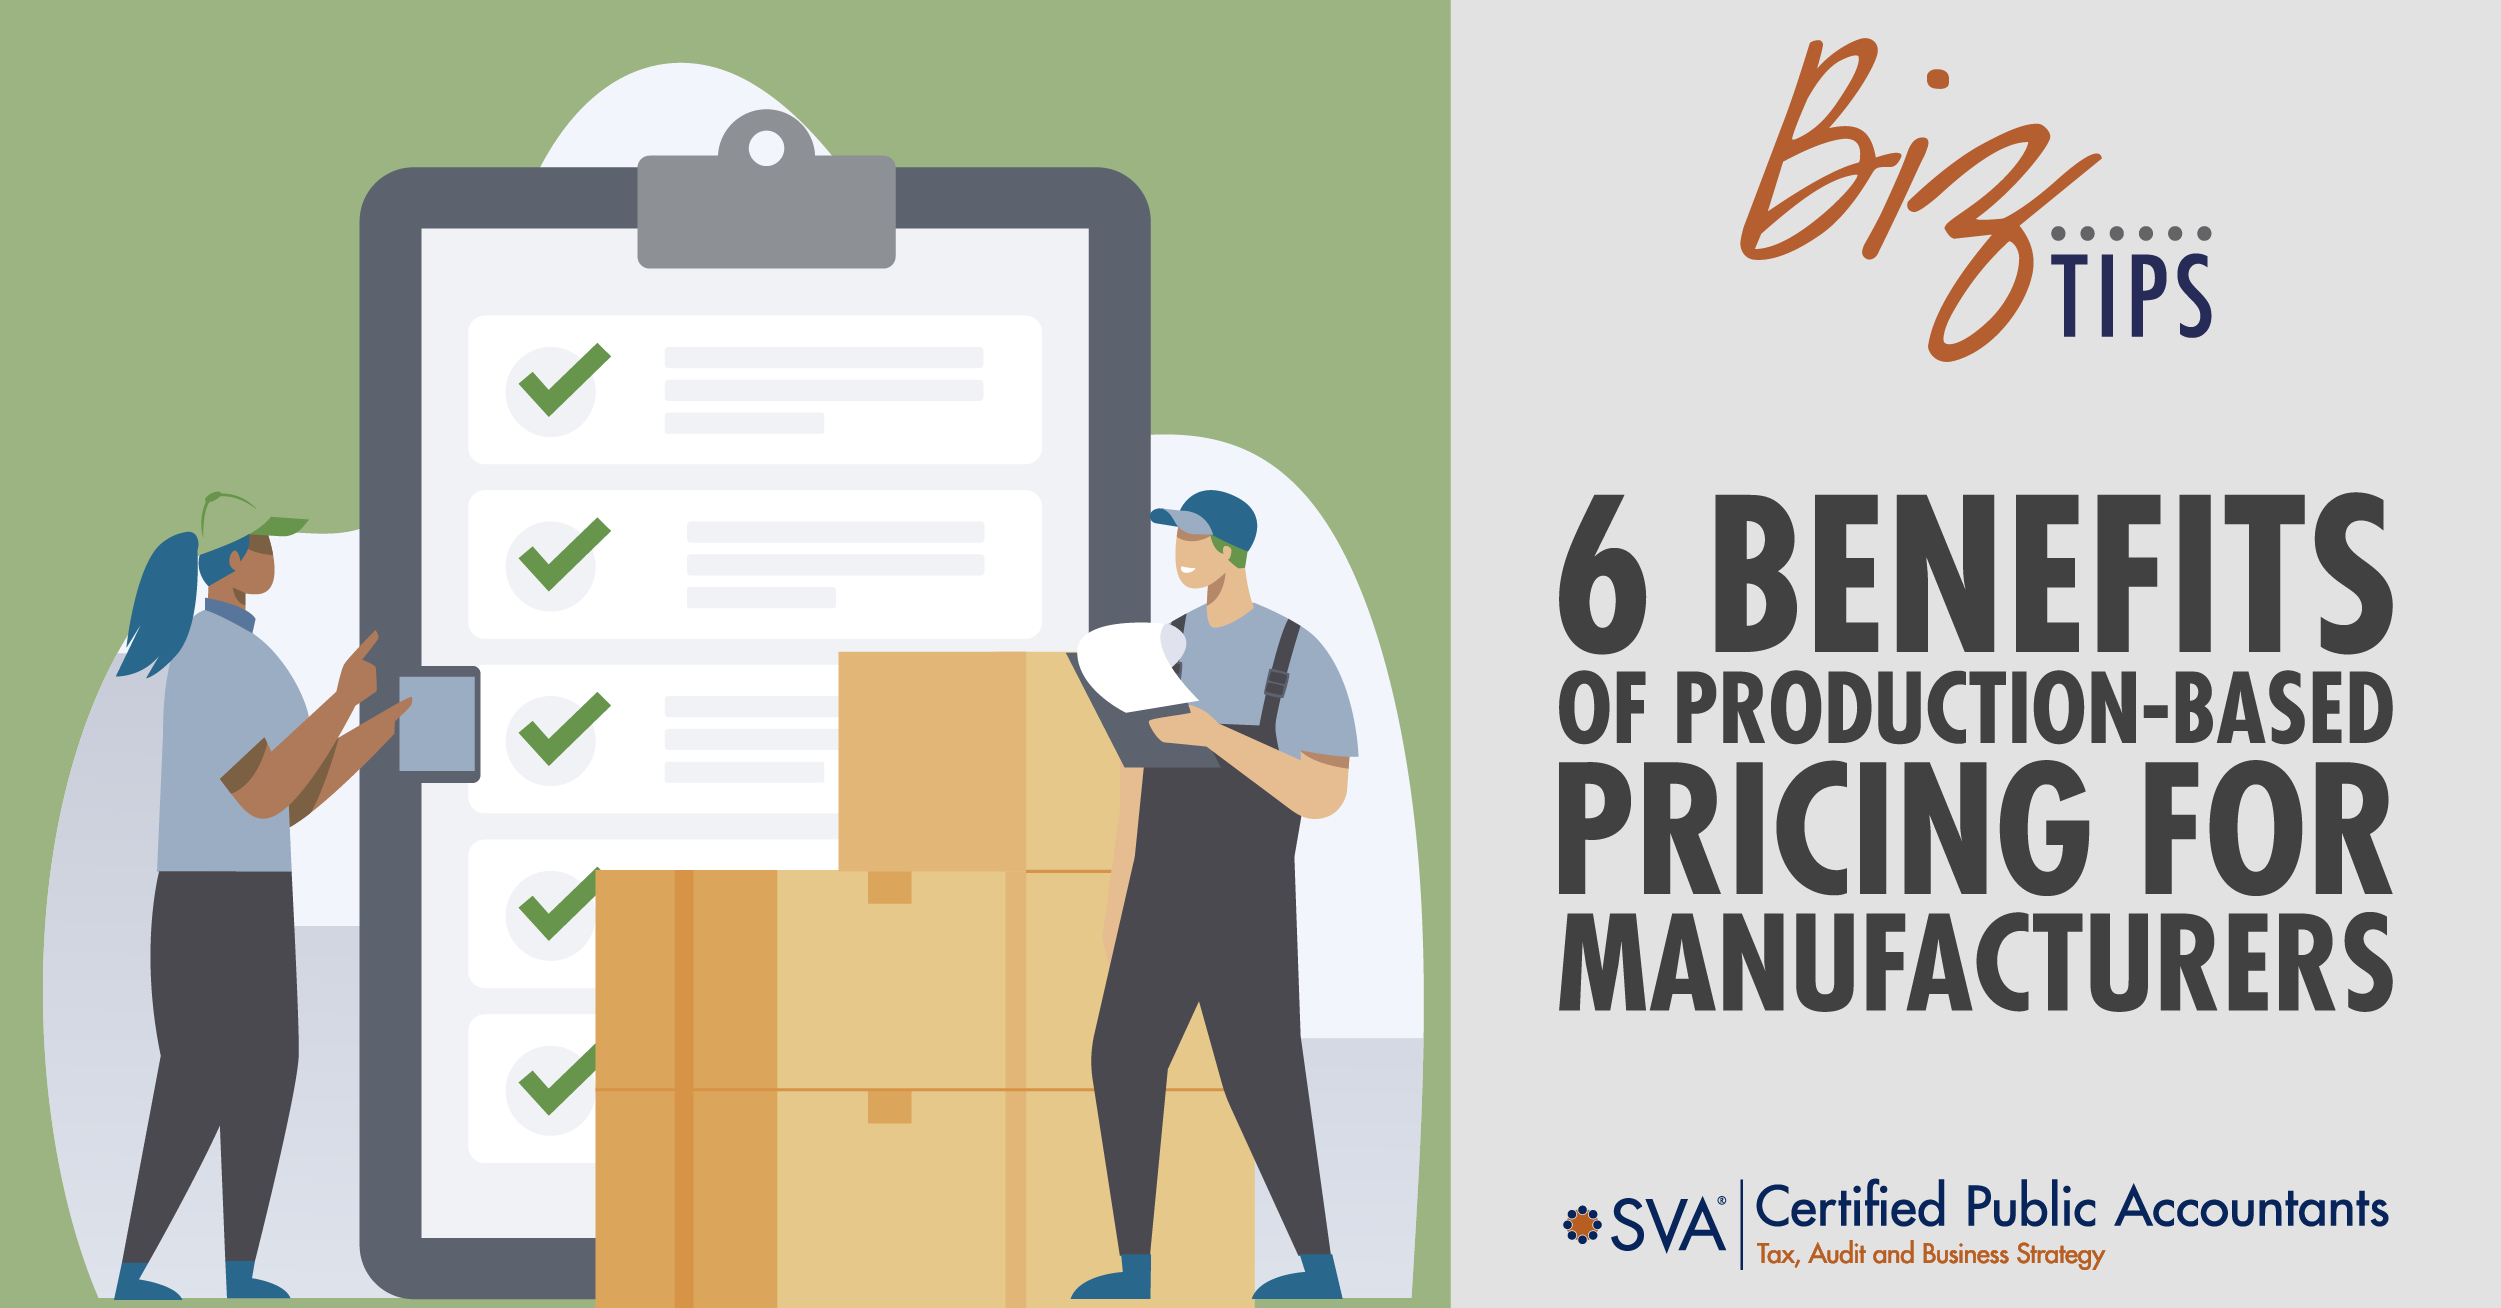 6 Benefits of Production-Based Pricing for Manufacturers